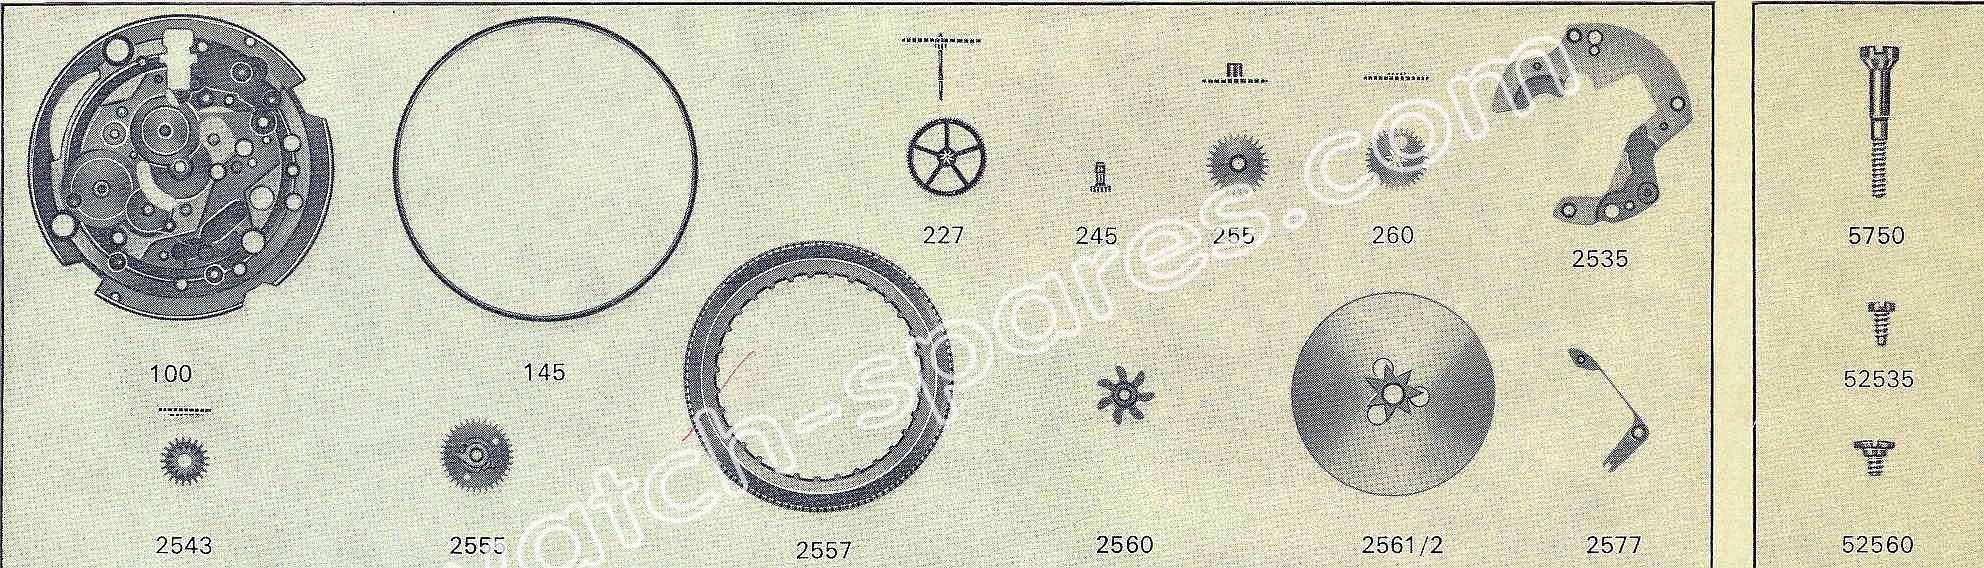 FHF Font 908 watch date spare parts